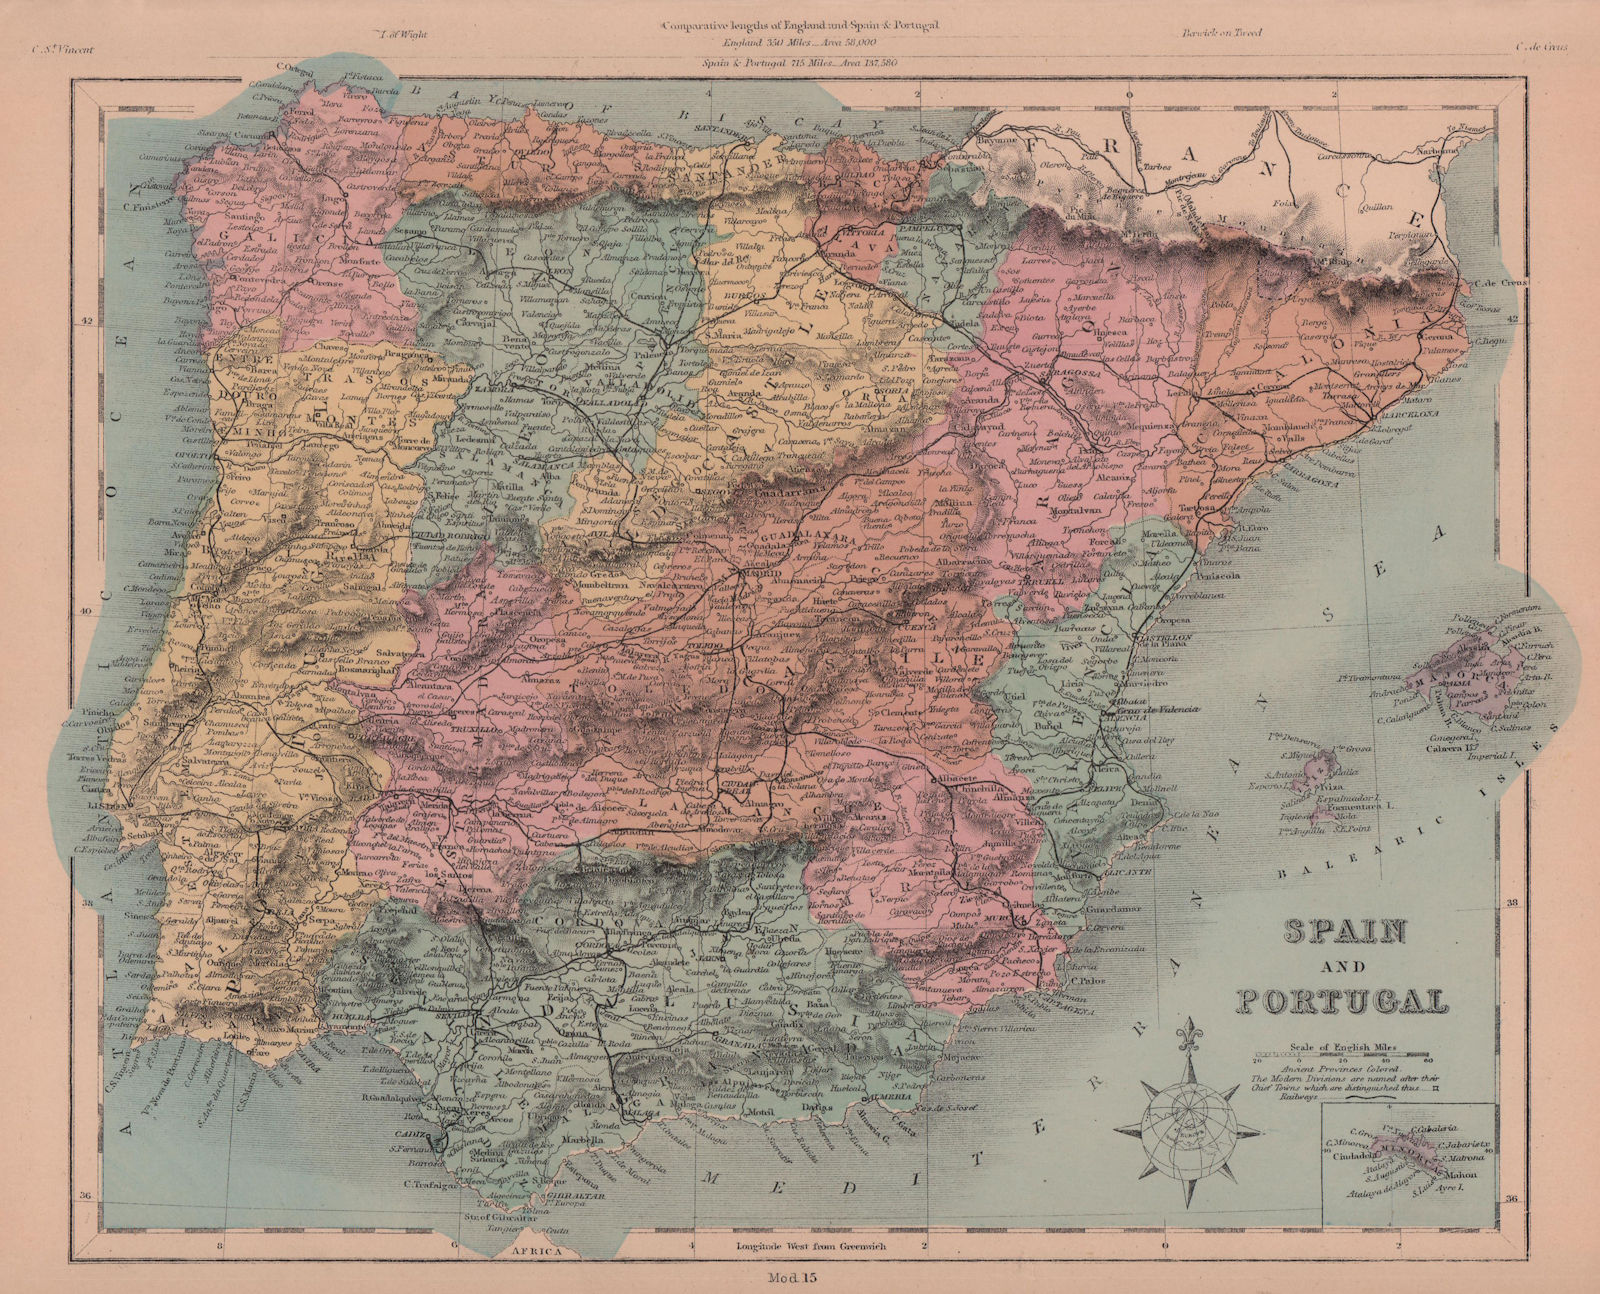 Associate Product Spain and Portugal. Iberia. Railways. HUGHES 1876 old antique map plan chart